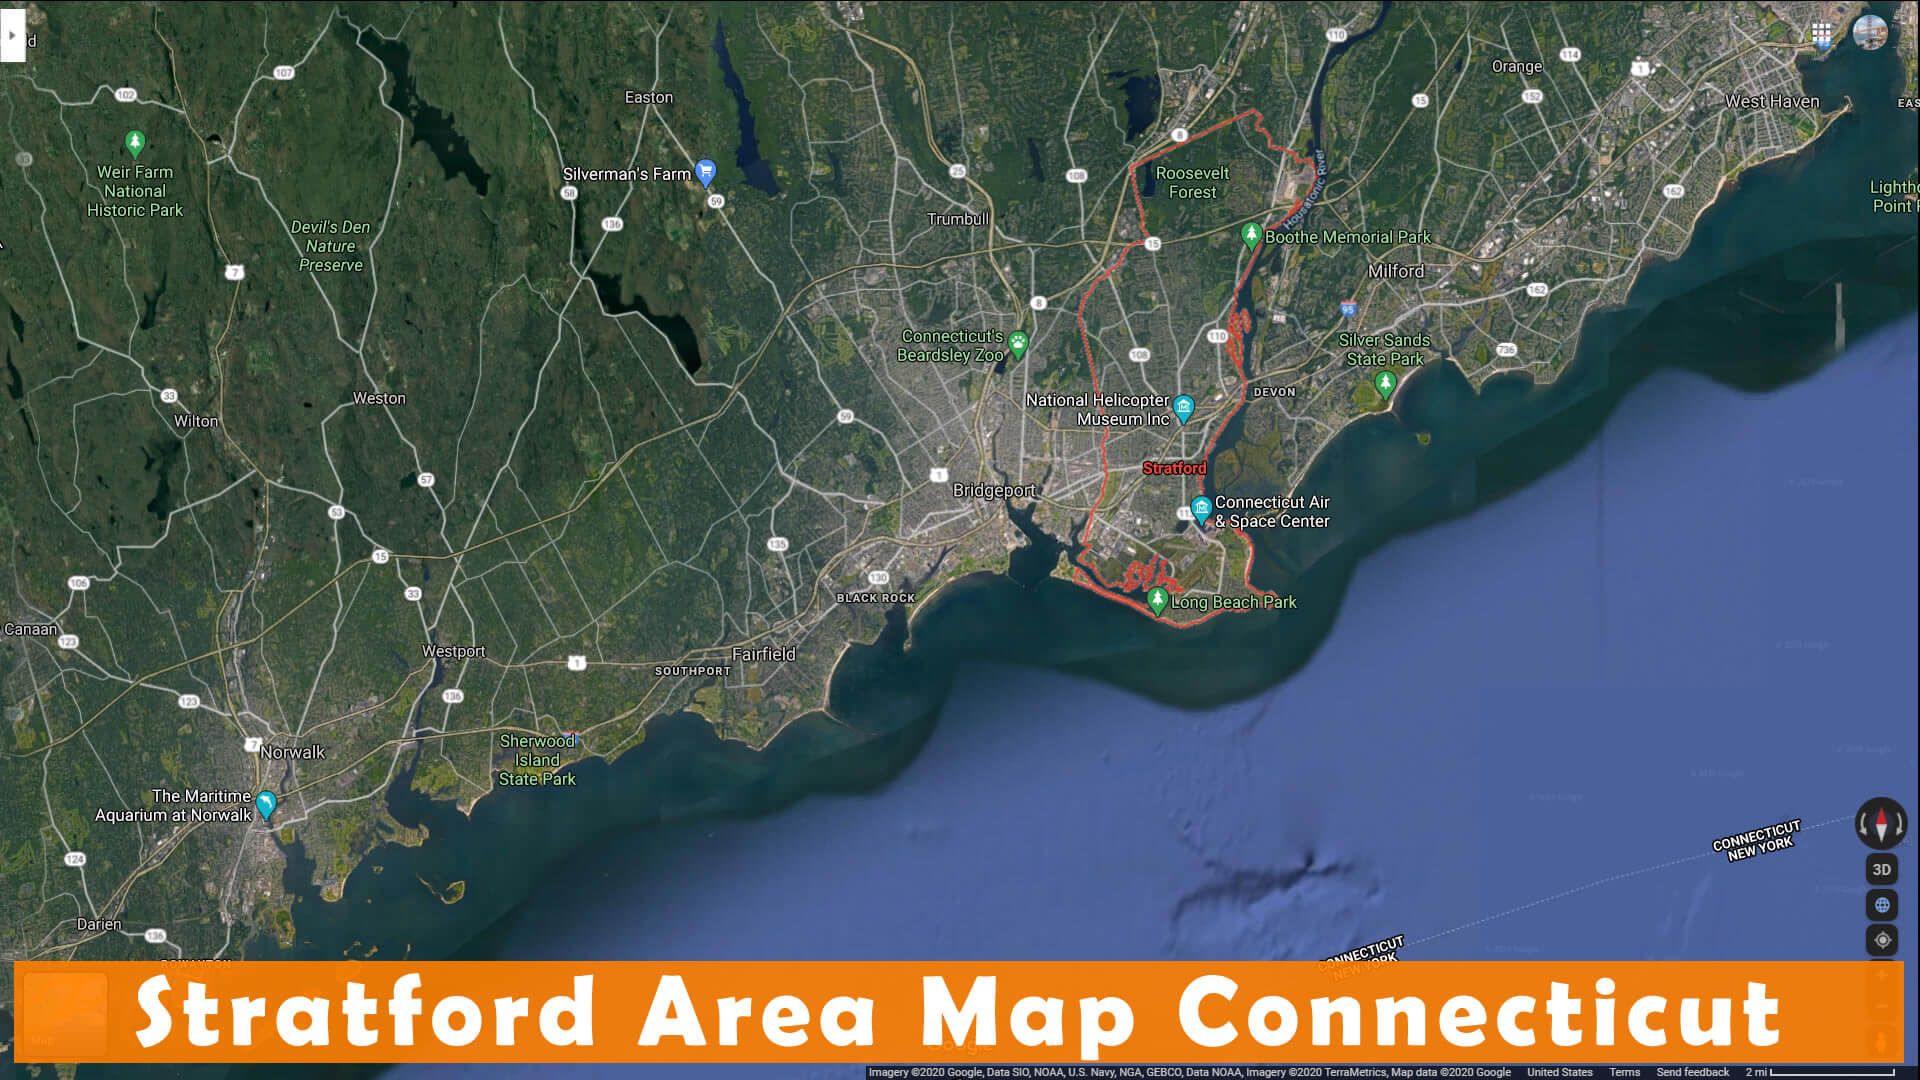 Stratford Area Map Connecticut